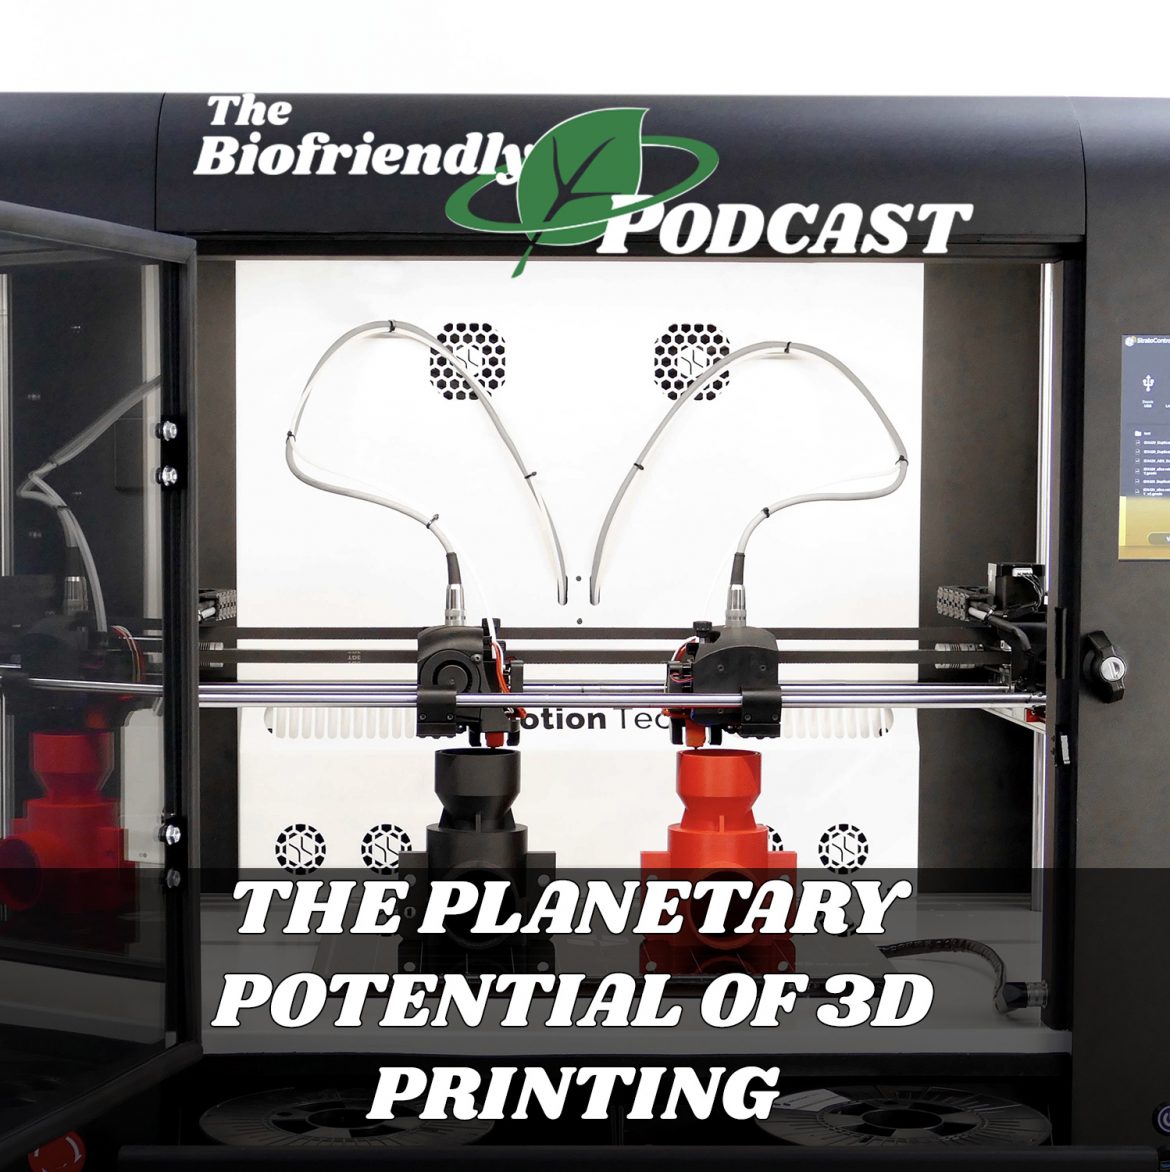 The Planetary Potential of 3D Printing